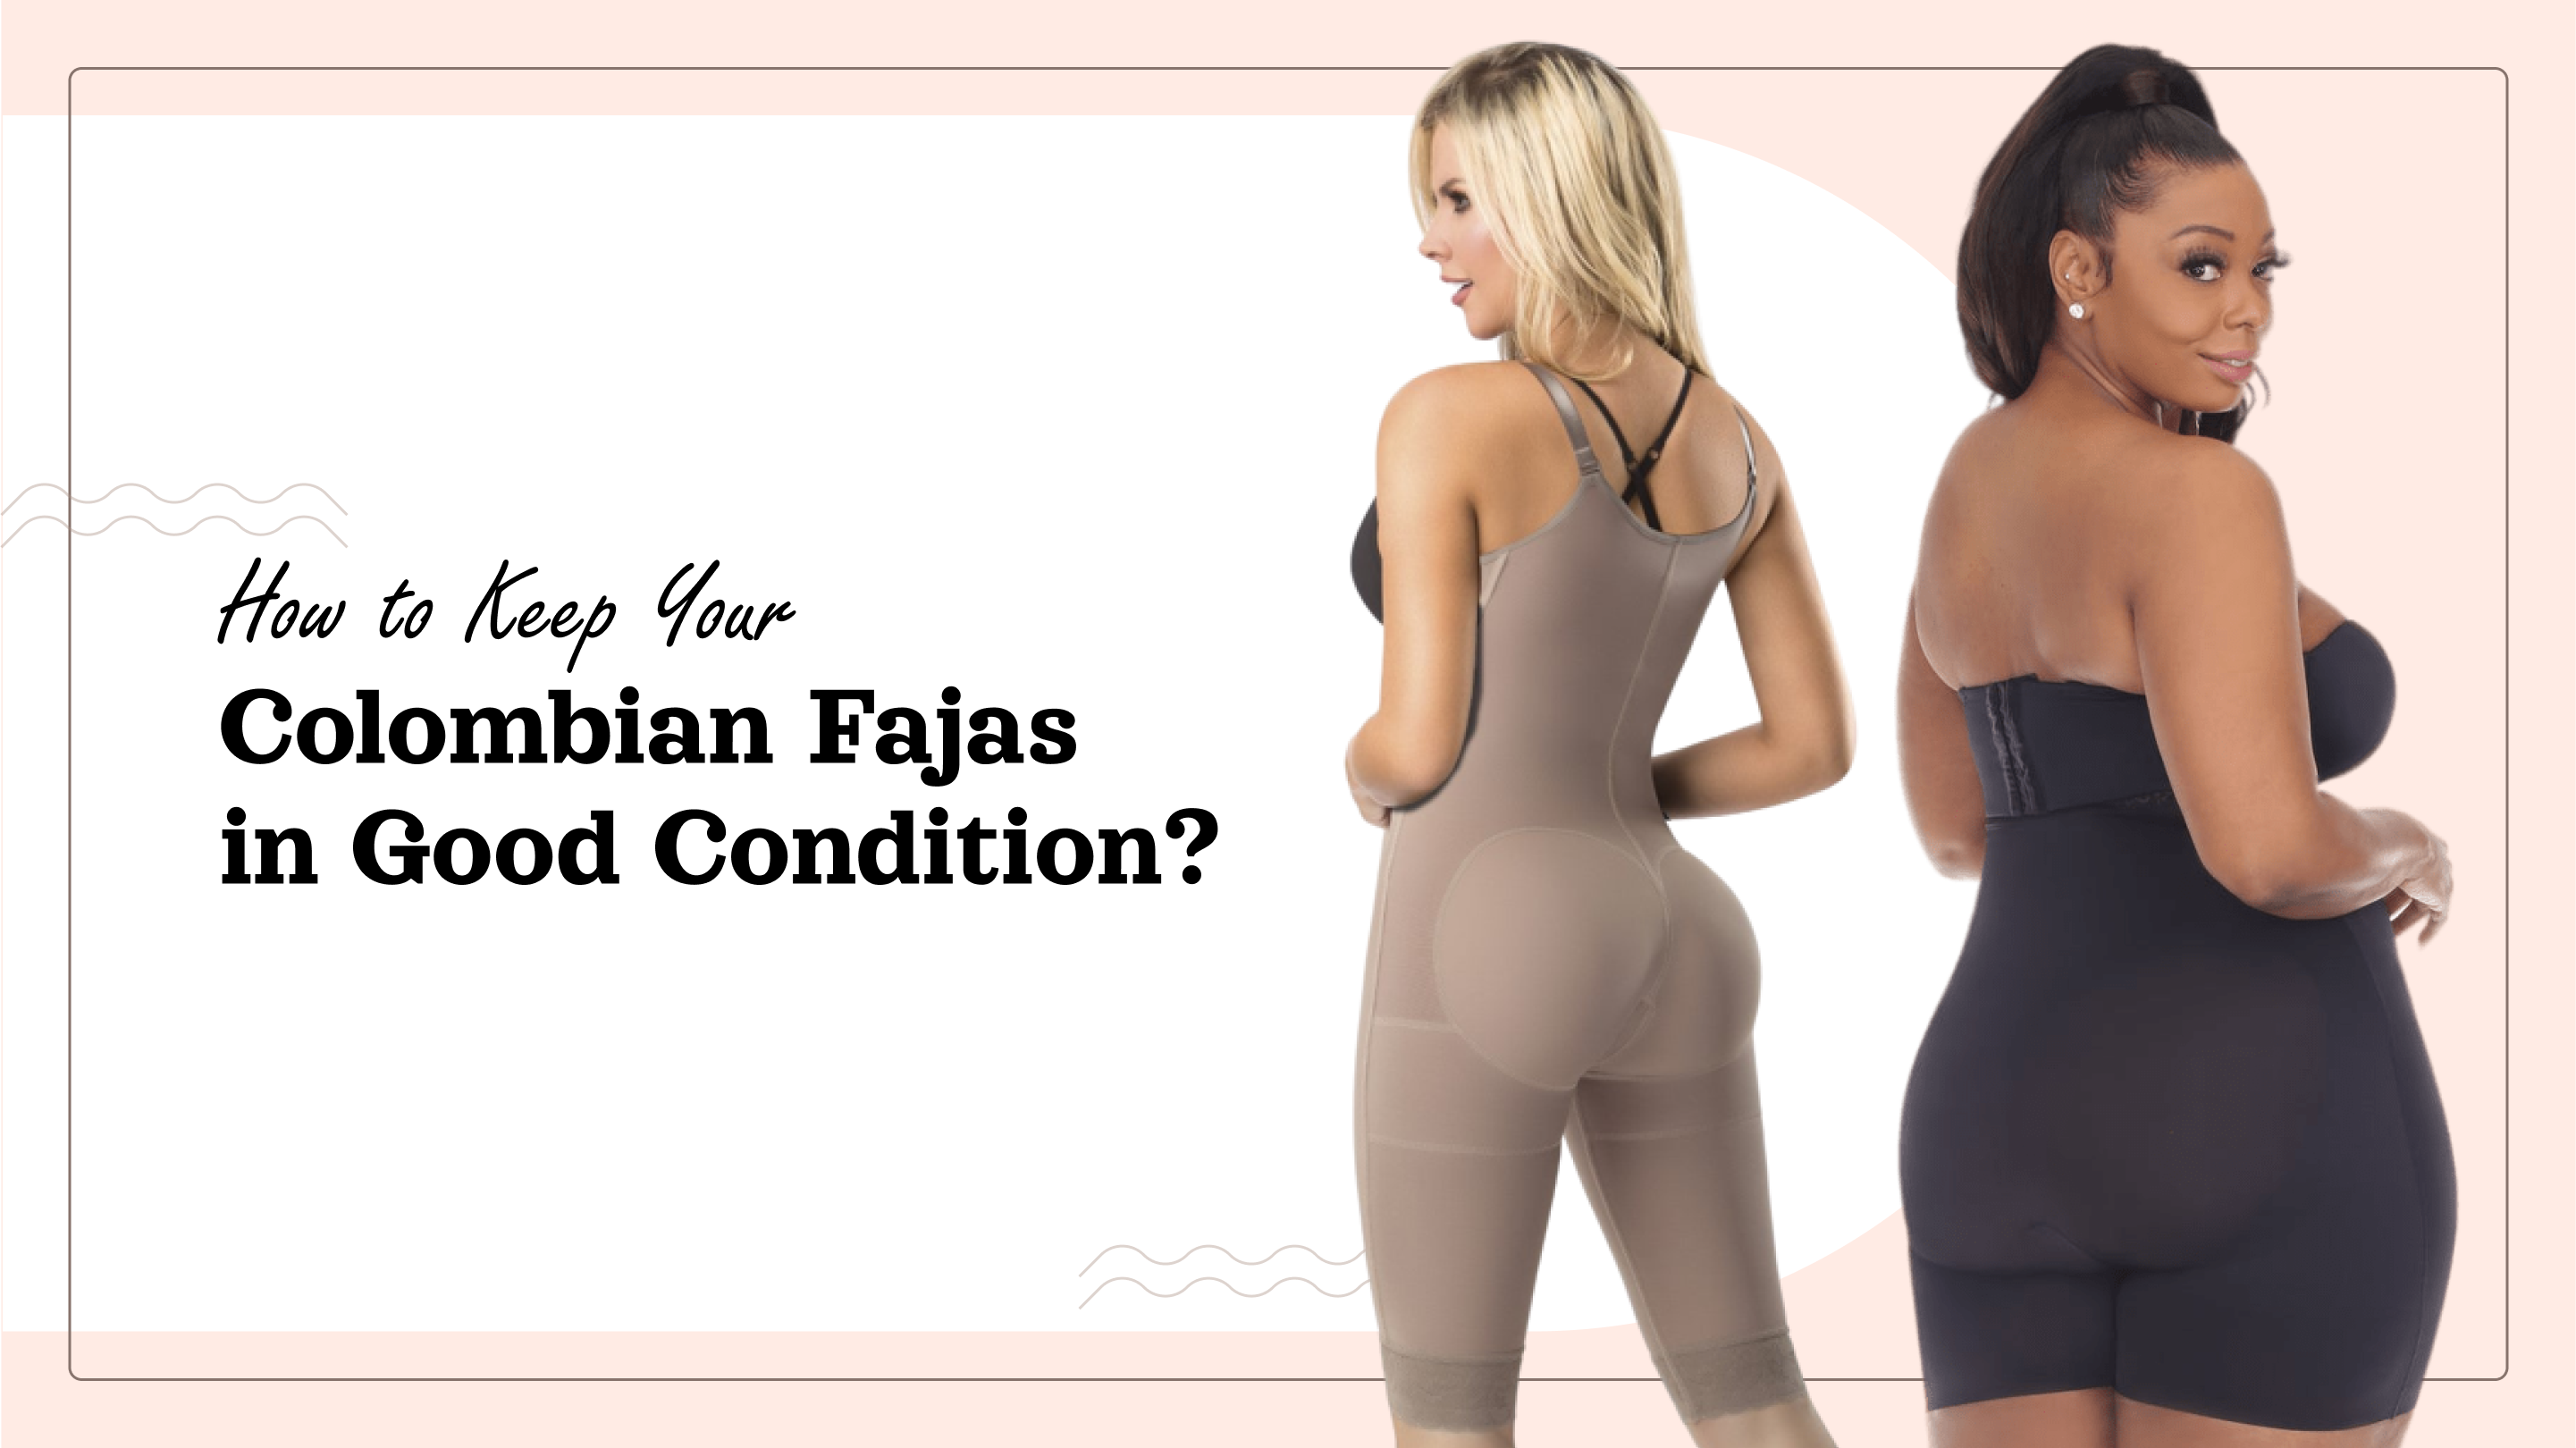 Part 1: Difference between Shapewear VS Fajas. It's all about your